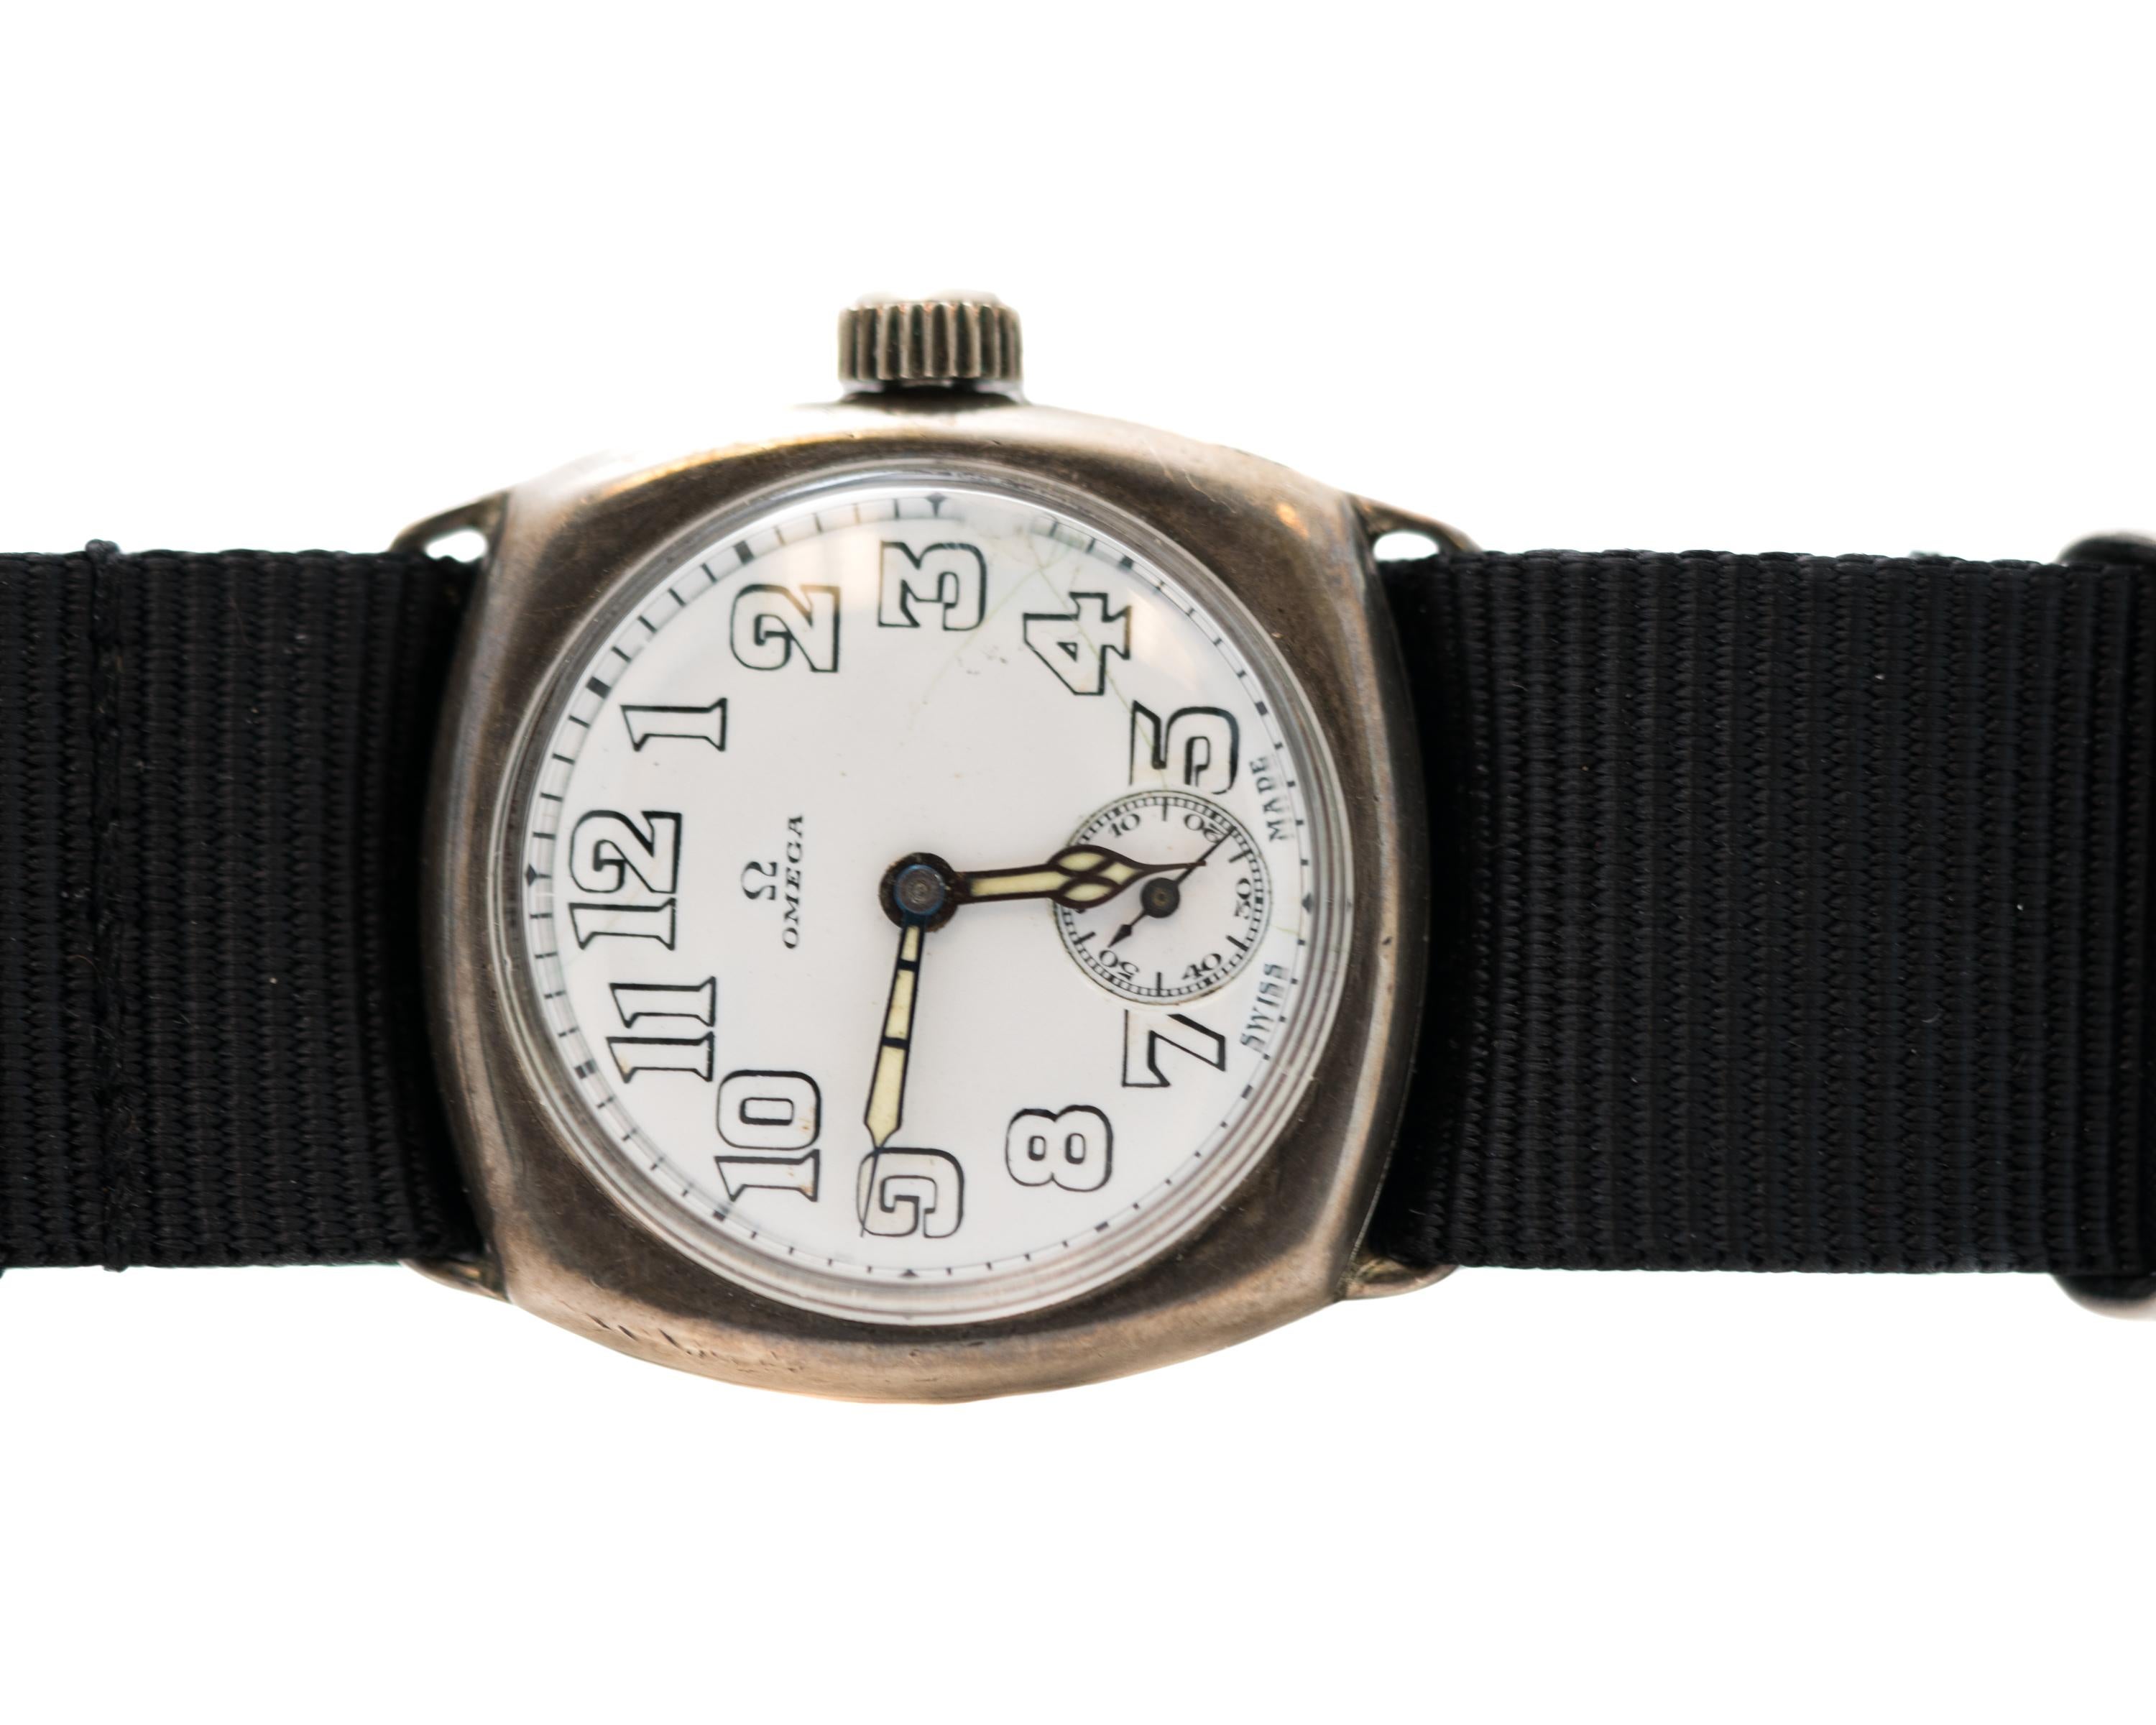 1920s Omega Military Watch with NATO Strap

Features: 
Case Diameter: 30 millimeter without crown, 33 millimeter with crown
Black NATO Strap fits up to 10.5 inch wrist, adjustable with buckle clasp
Seconds Subdial at 6:00 position
Black and White